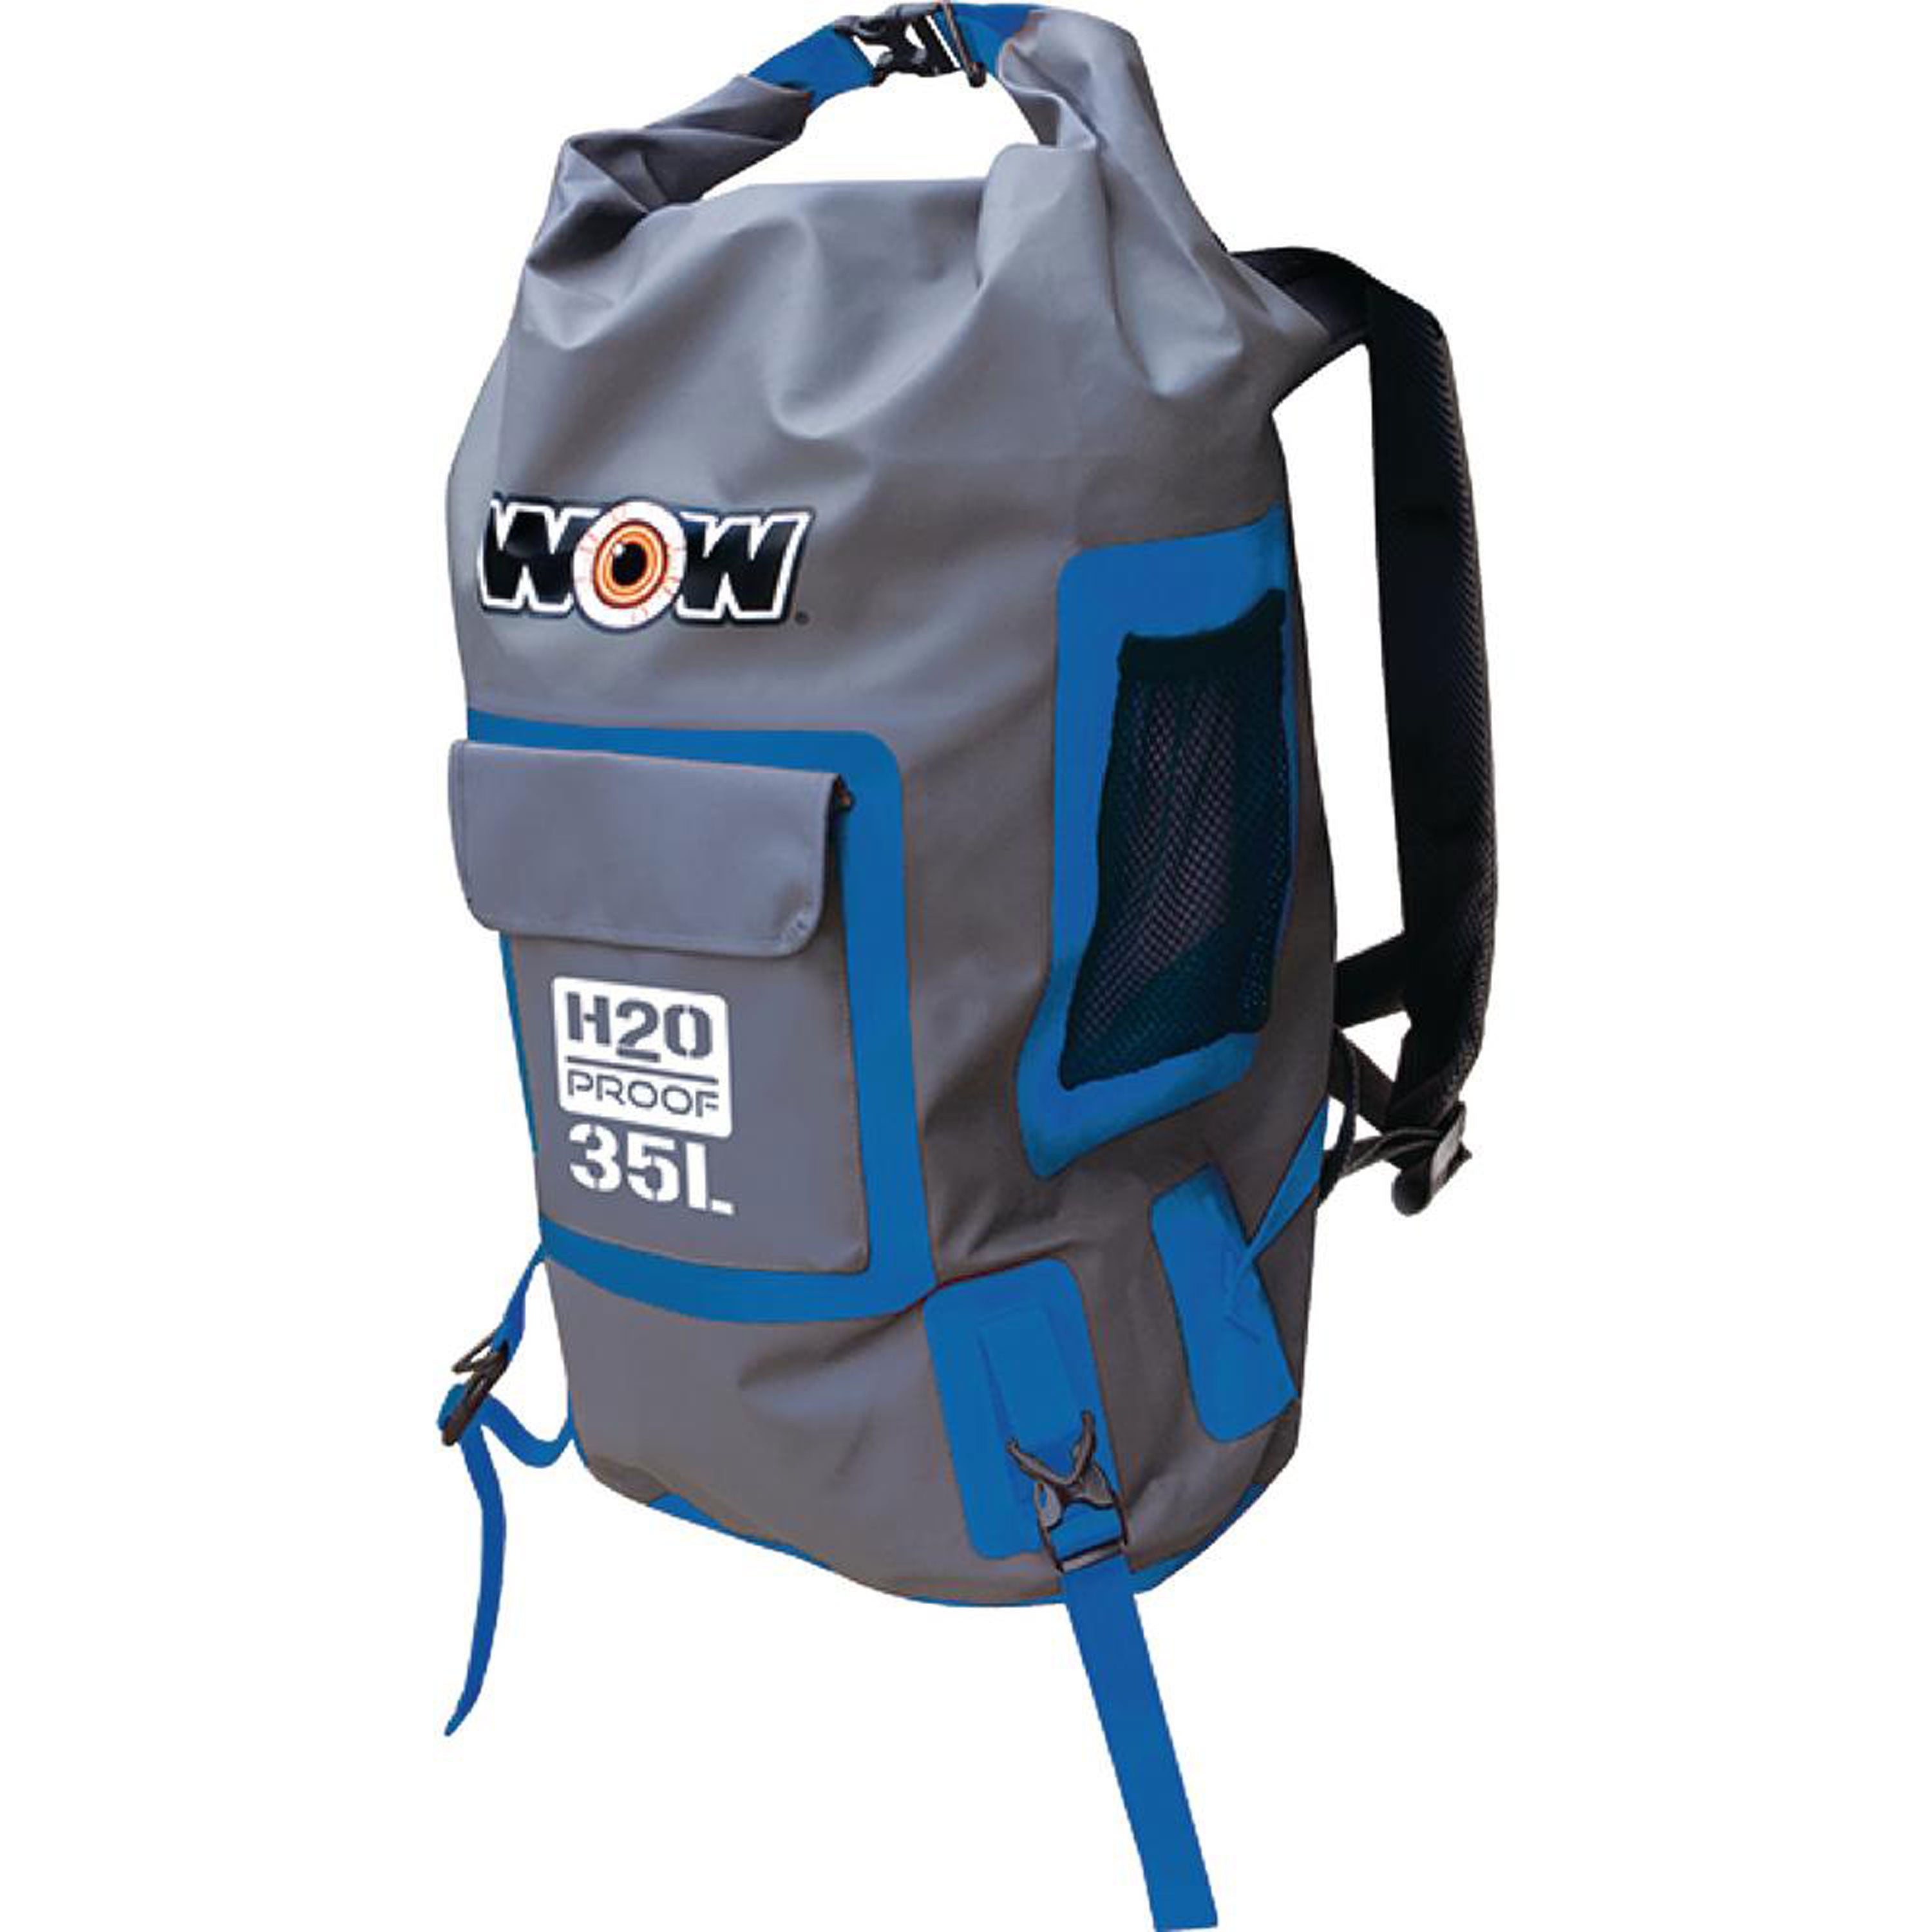 WOW Watersports 18-5110B Backpack H2O Proof Dry Bag - Blue